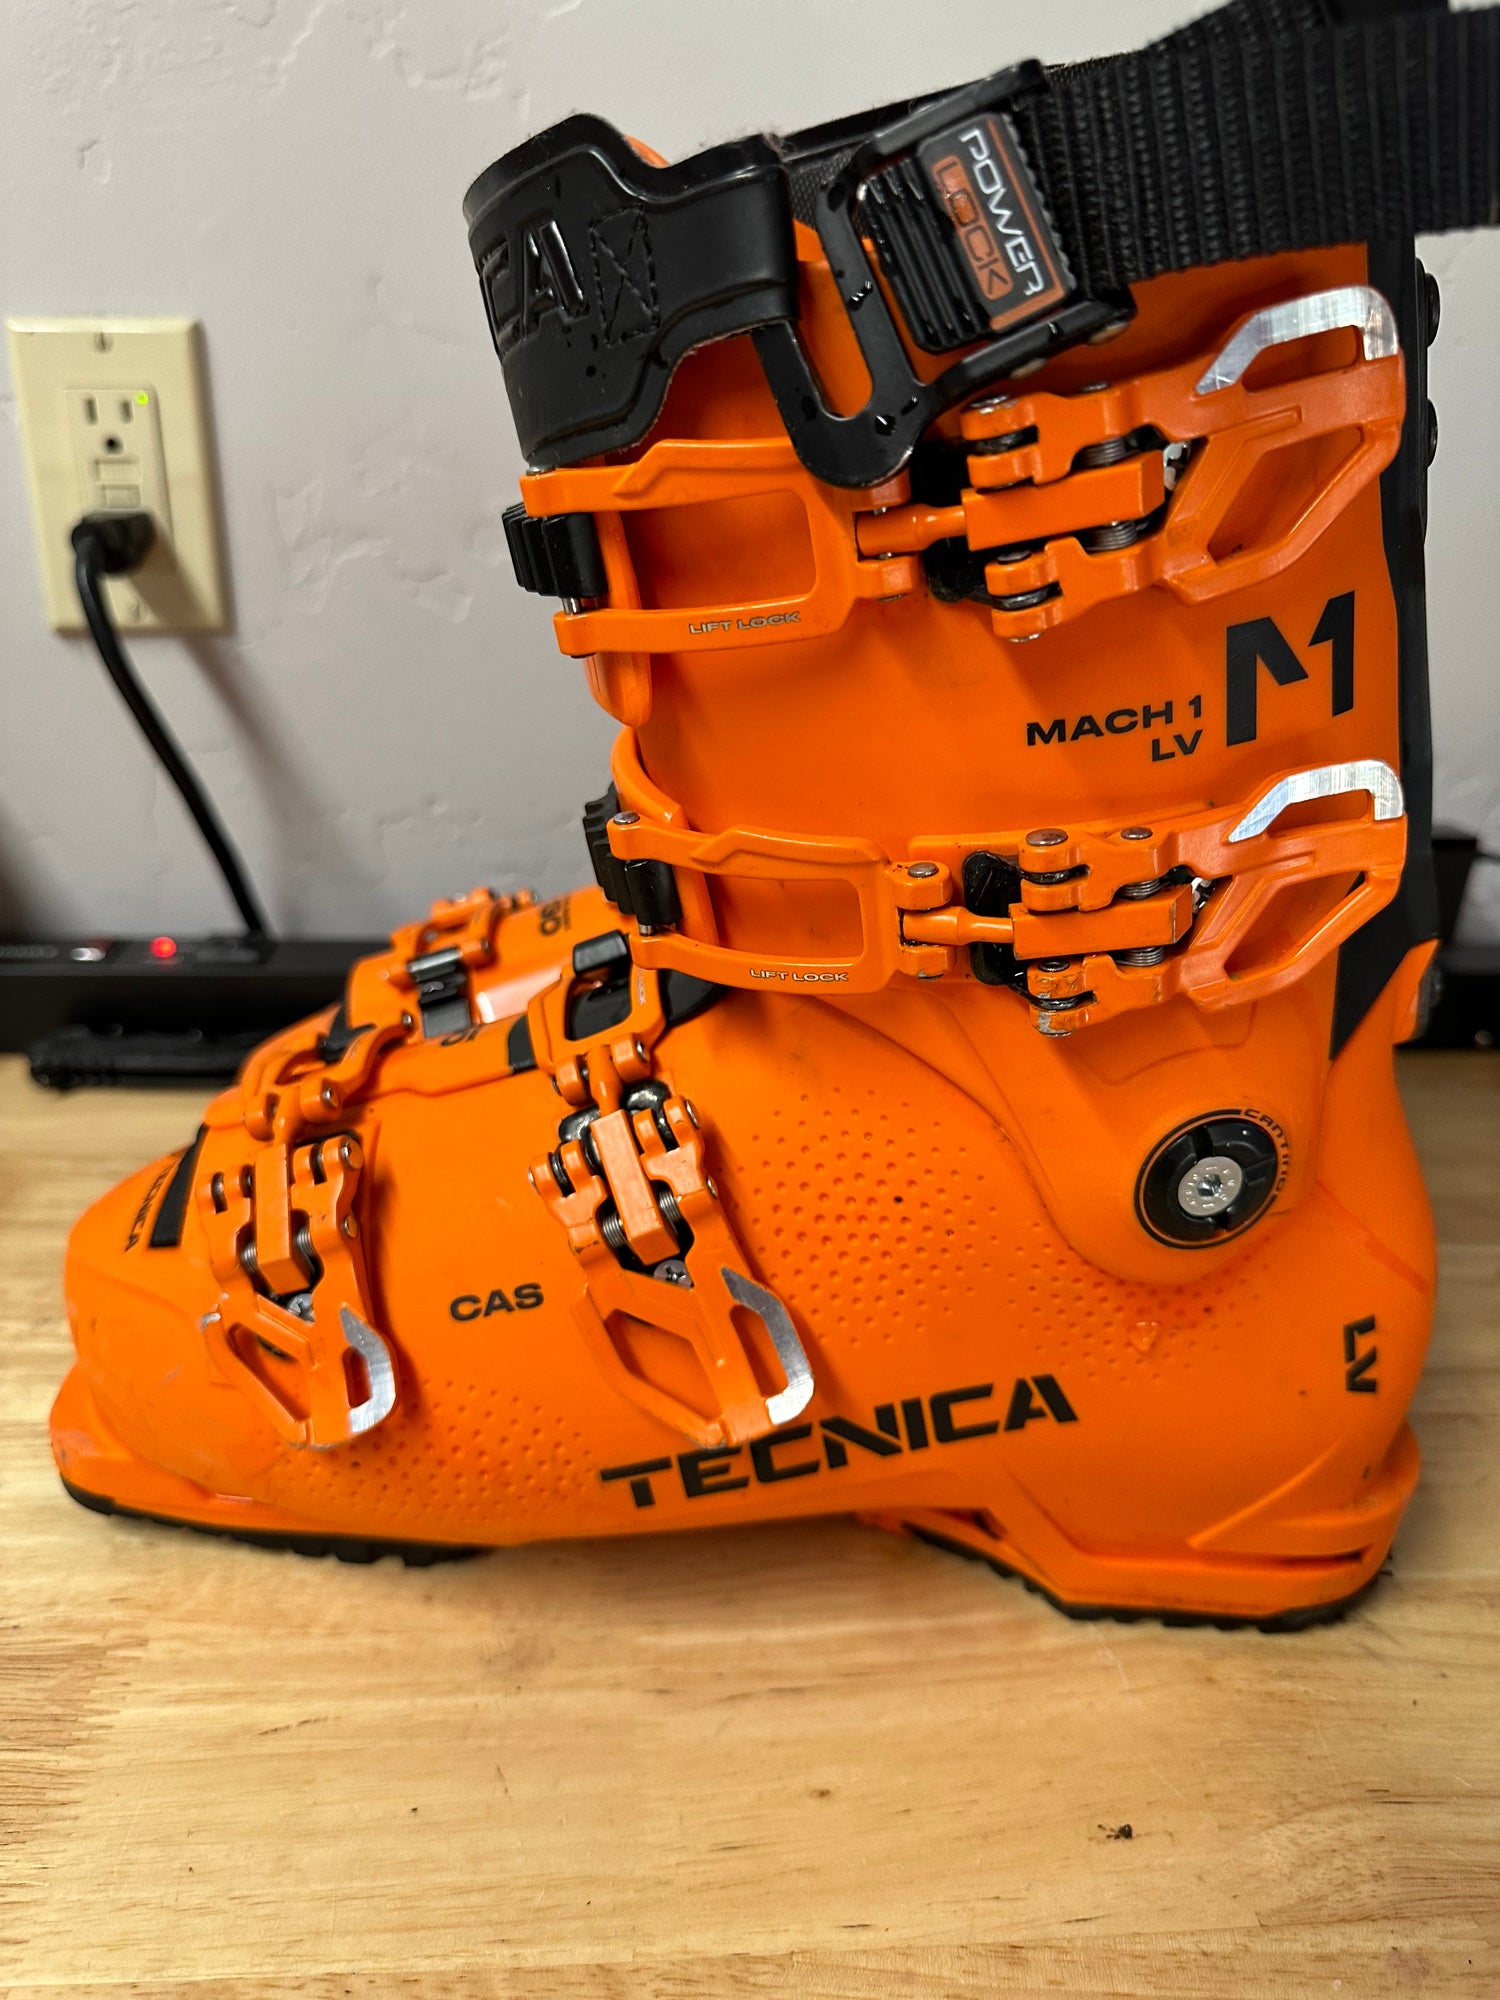 2023 Used Tecnica Mach 1 LV 130 Ski Boots and New Liners - 26.5